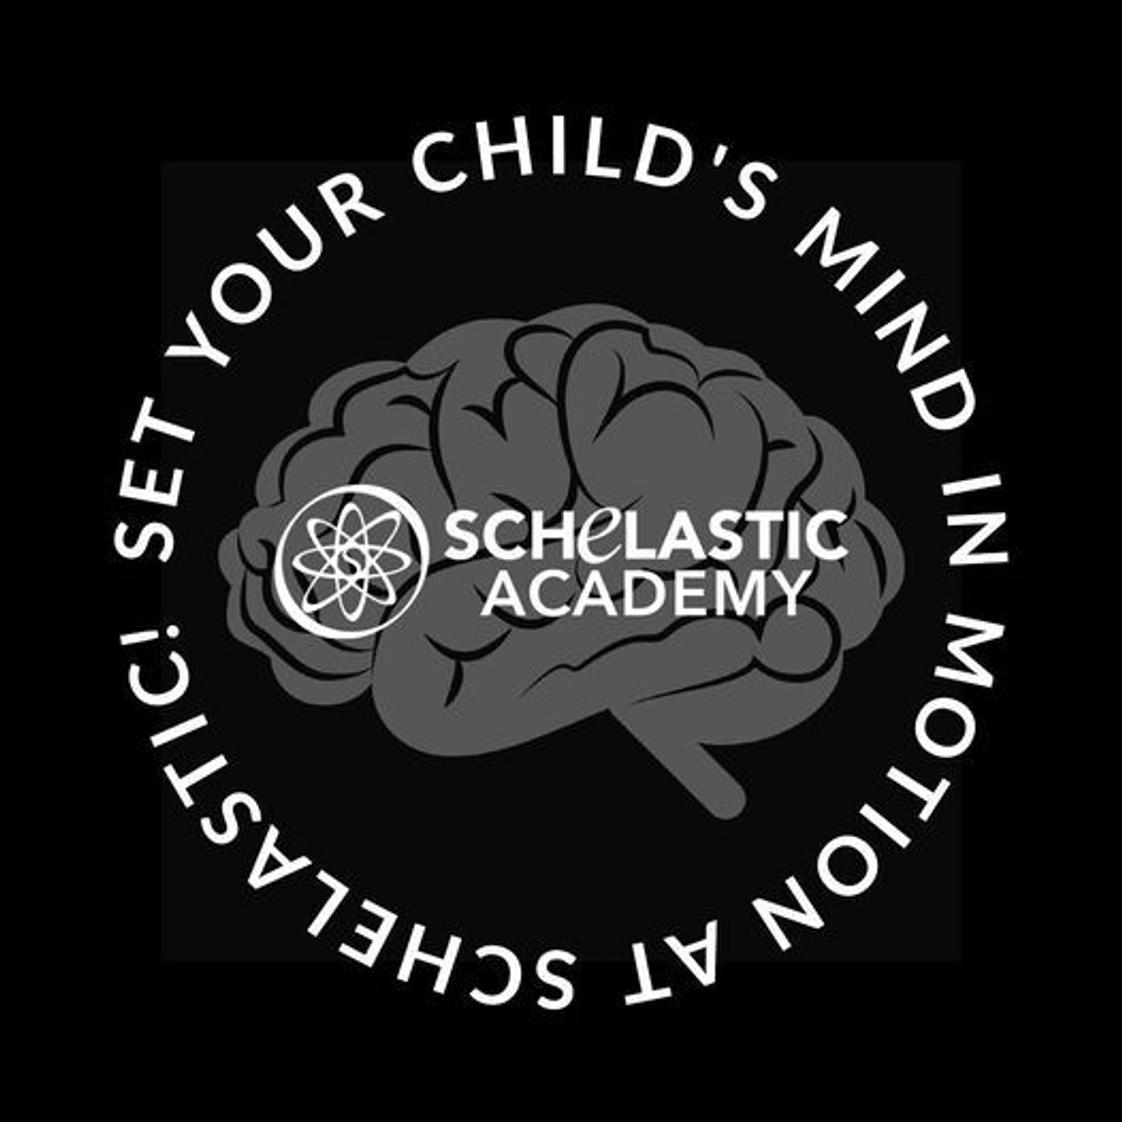 Schelastic Academy Photo #1 - Your child IS capable of achieving their goals! At Schelastic Academy we believe that every child is capable of achieving their academic goals within an engaging and consistent learning environment.